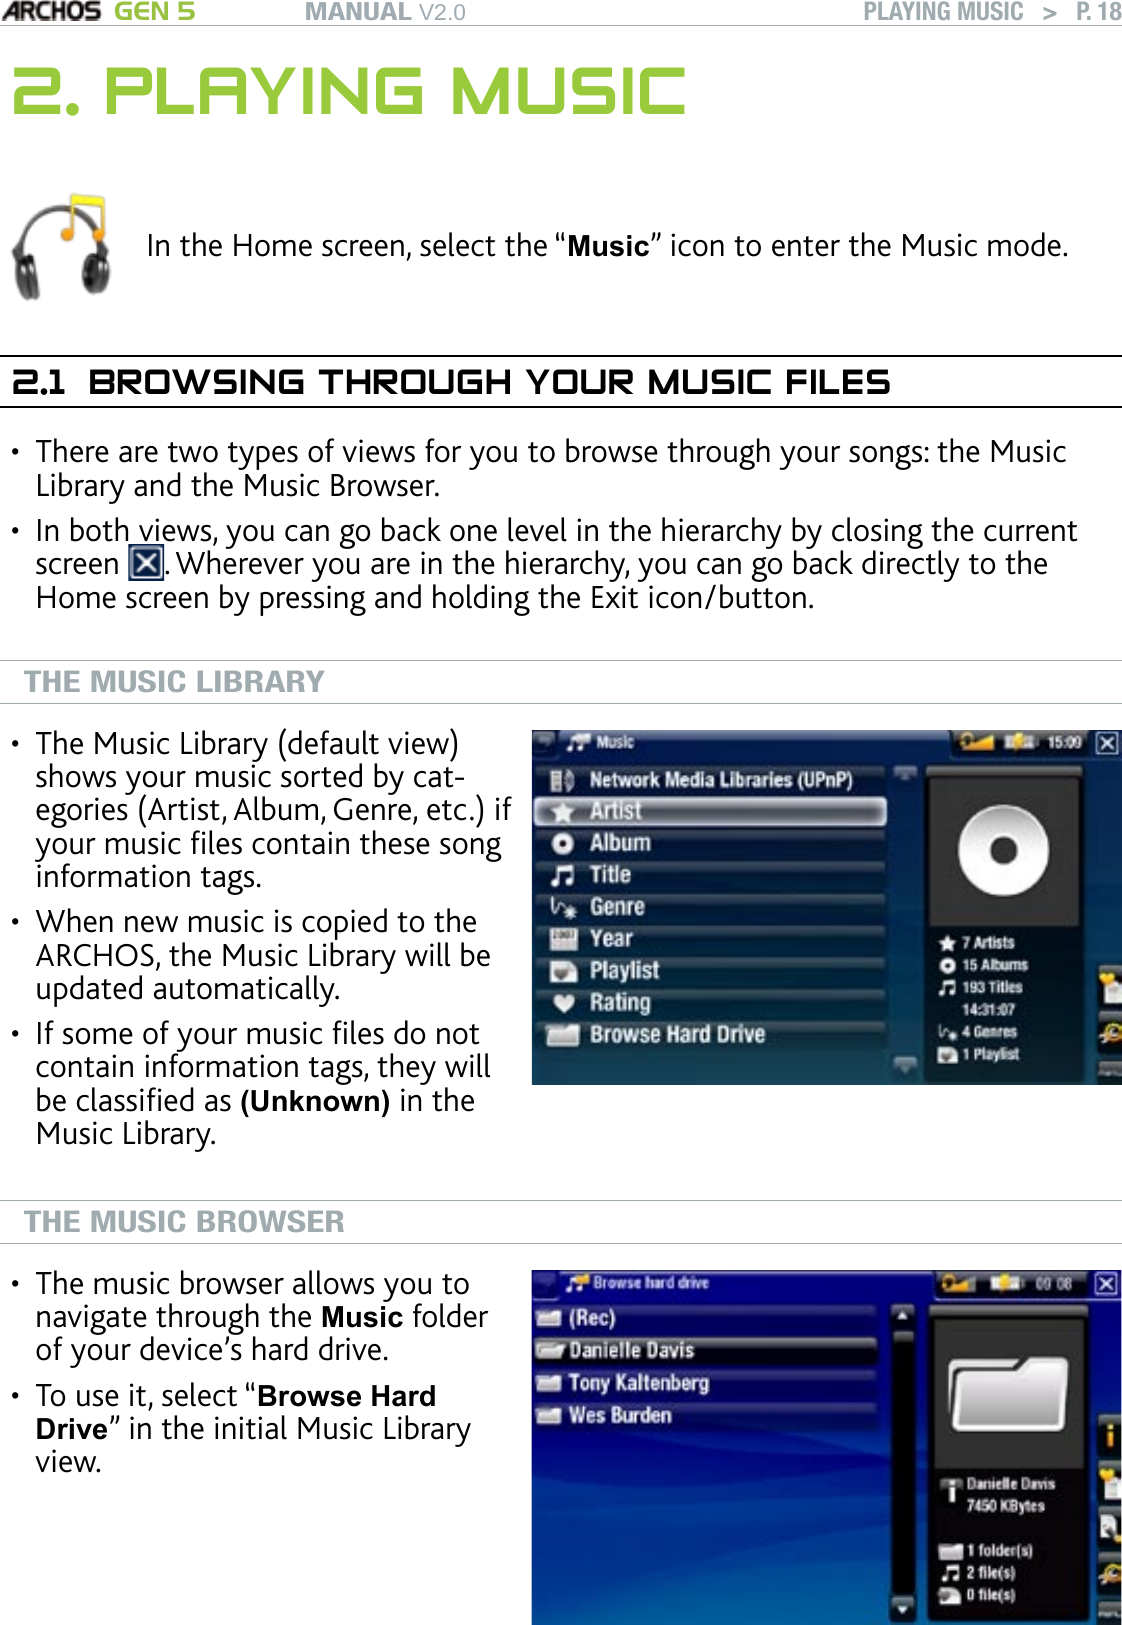 MANUAL V2.0 GEN 5 PLAYING MUSIC   &gt;   P. 182. PLAYING MUSICIn the Home screen, select the “Music” icon to enter the Music mode.2.1  BROWSING THROUGH YOUR MUSIC FILESThere are two types of views for you to browse through your songs: the Music Library and the Music Browser.In both views, you can go back one level in the hierarchy by closing the current screen  . Wherever you are in the hierarchy, you can go back directly to the Home screen by pressing and holding the Exit icon/button.  THE MUSIC LIBRARYThe Music Library (default view) shows your music sorted by cat-egories (Artist, Album, Genre, etc.) if your music les contain these song information tags.When new music is copied to the ARCHOS, the Music Library will be updated automatically.If some of your music les do not contain information tags, they will be classied as (Unknown) in the Music Library.•••THE MUSIC BROWSERThe music browser allows you to navigate through the Music folder of your device’s hard drive. To use it, select “Browse Hard Drive” in the initial Music Library view.••••